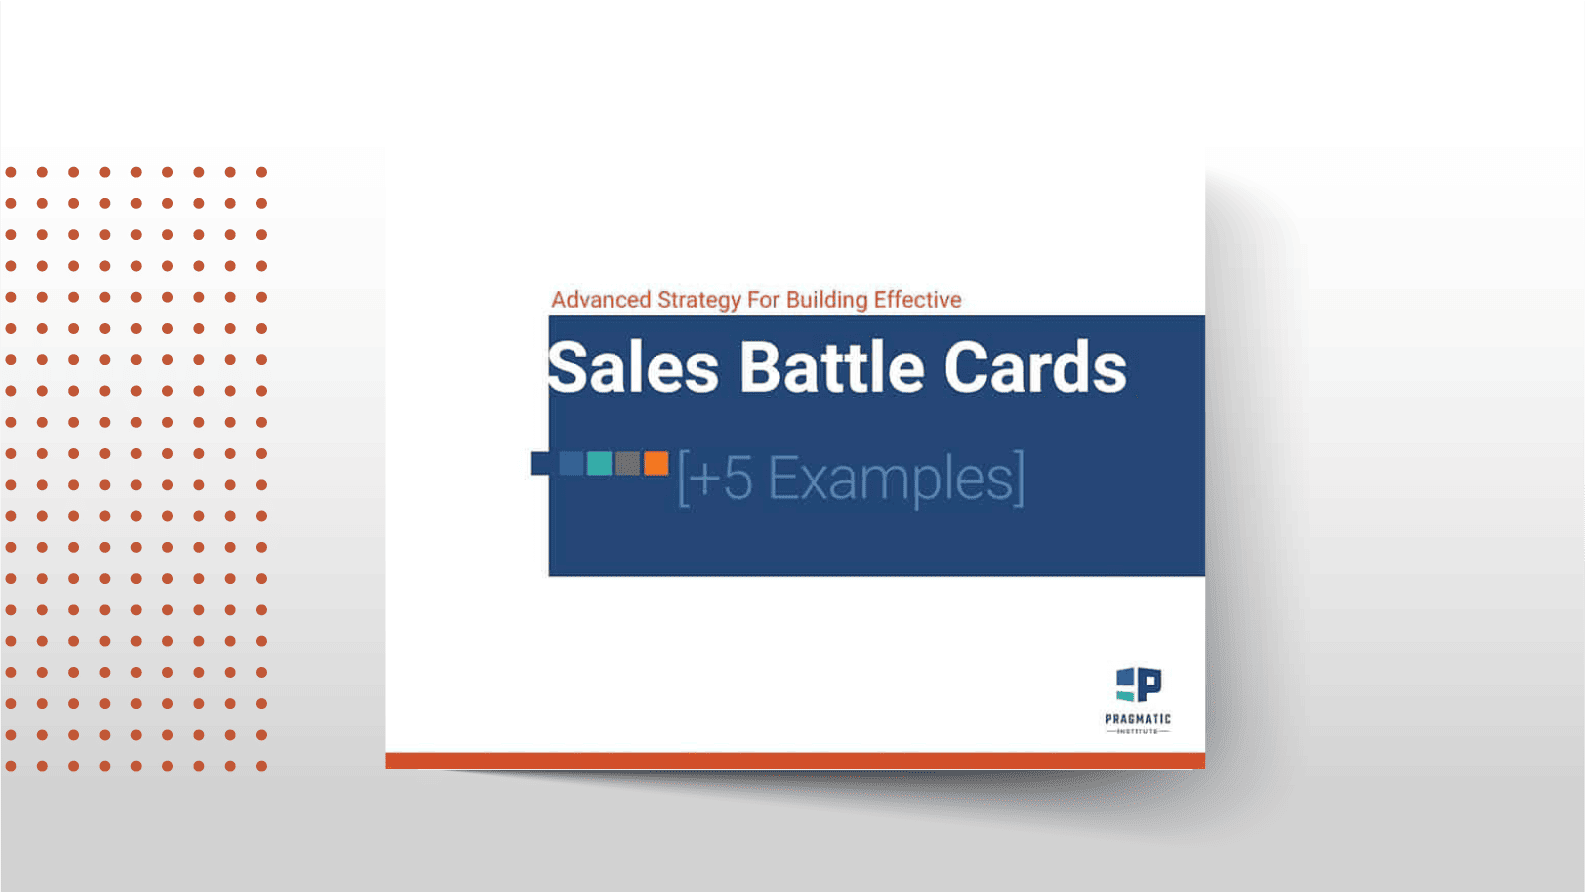 Advanced Strategy For Building Effective Sales Battle Cards